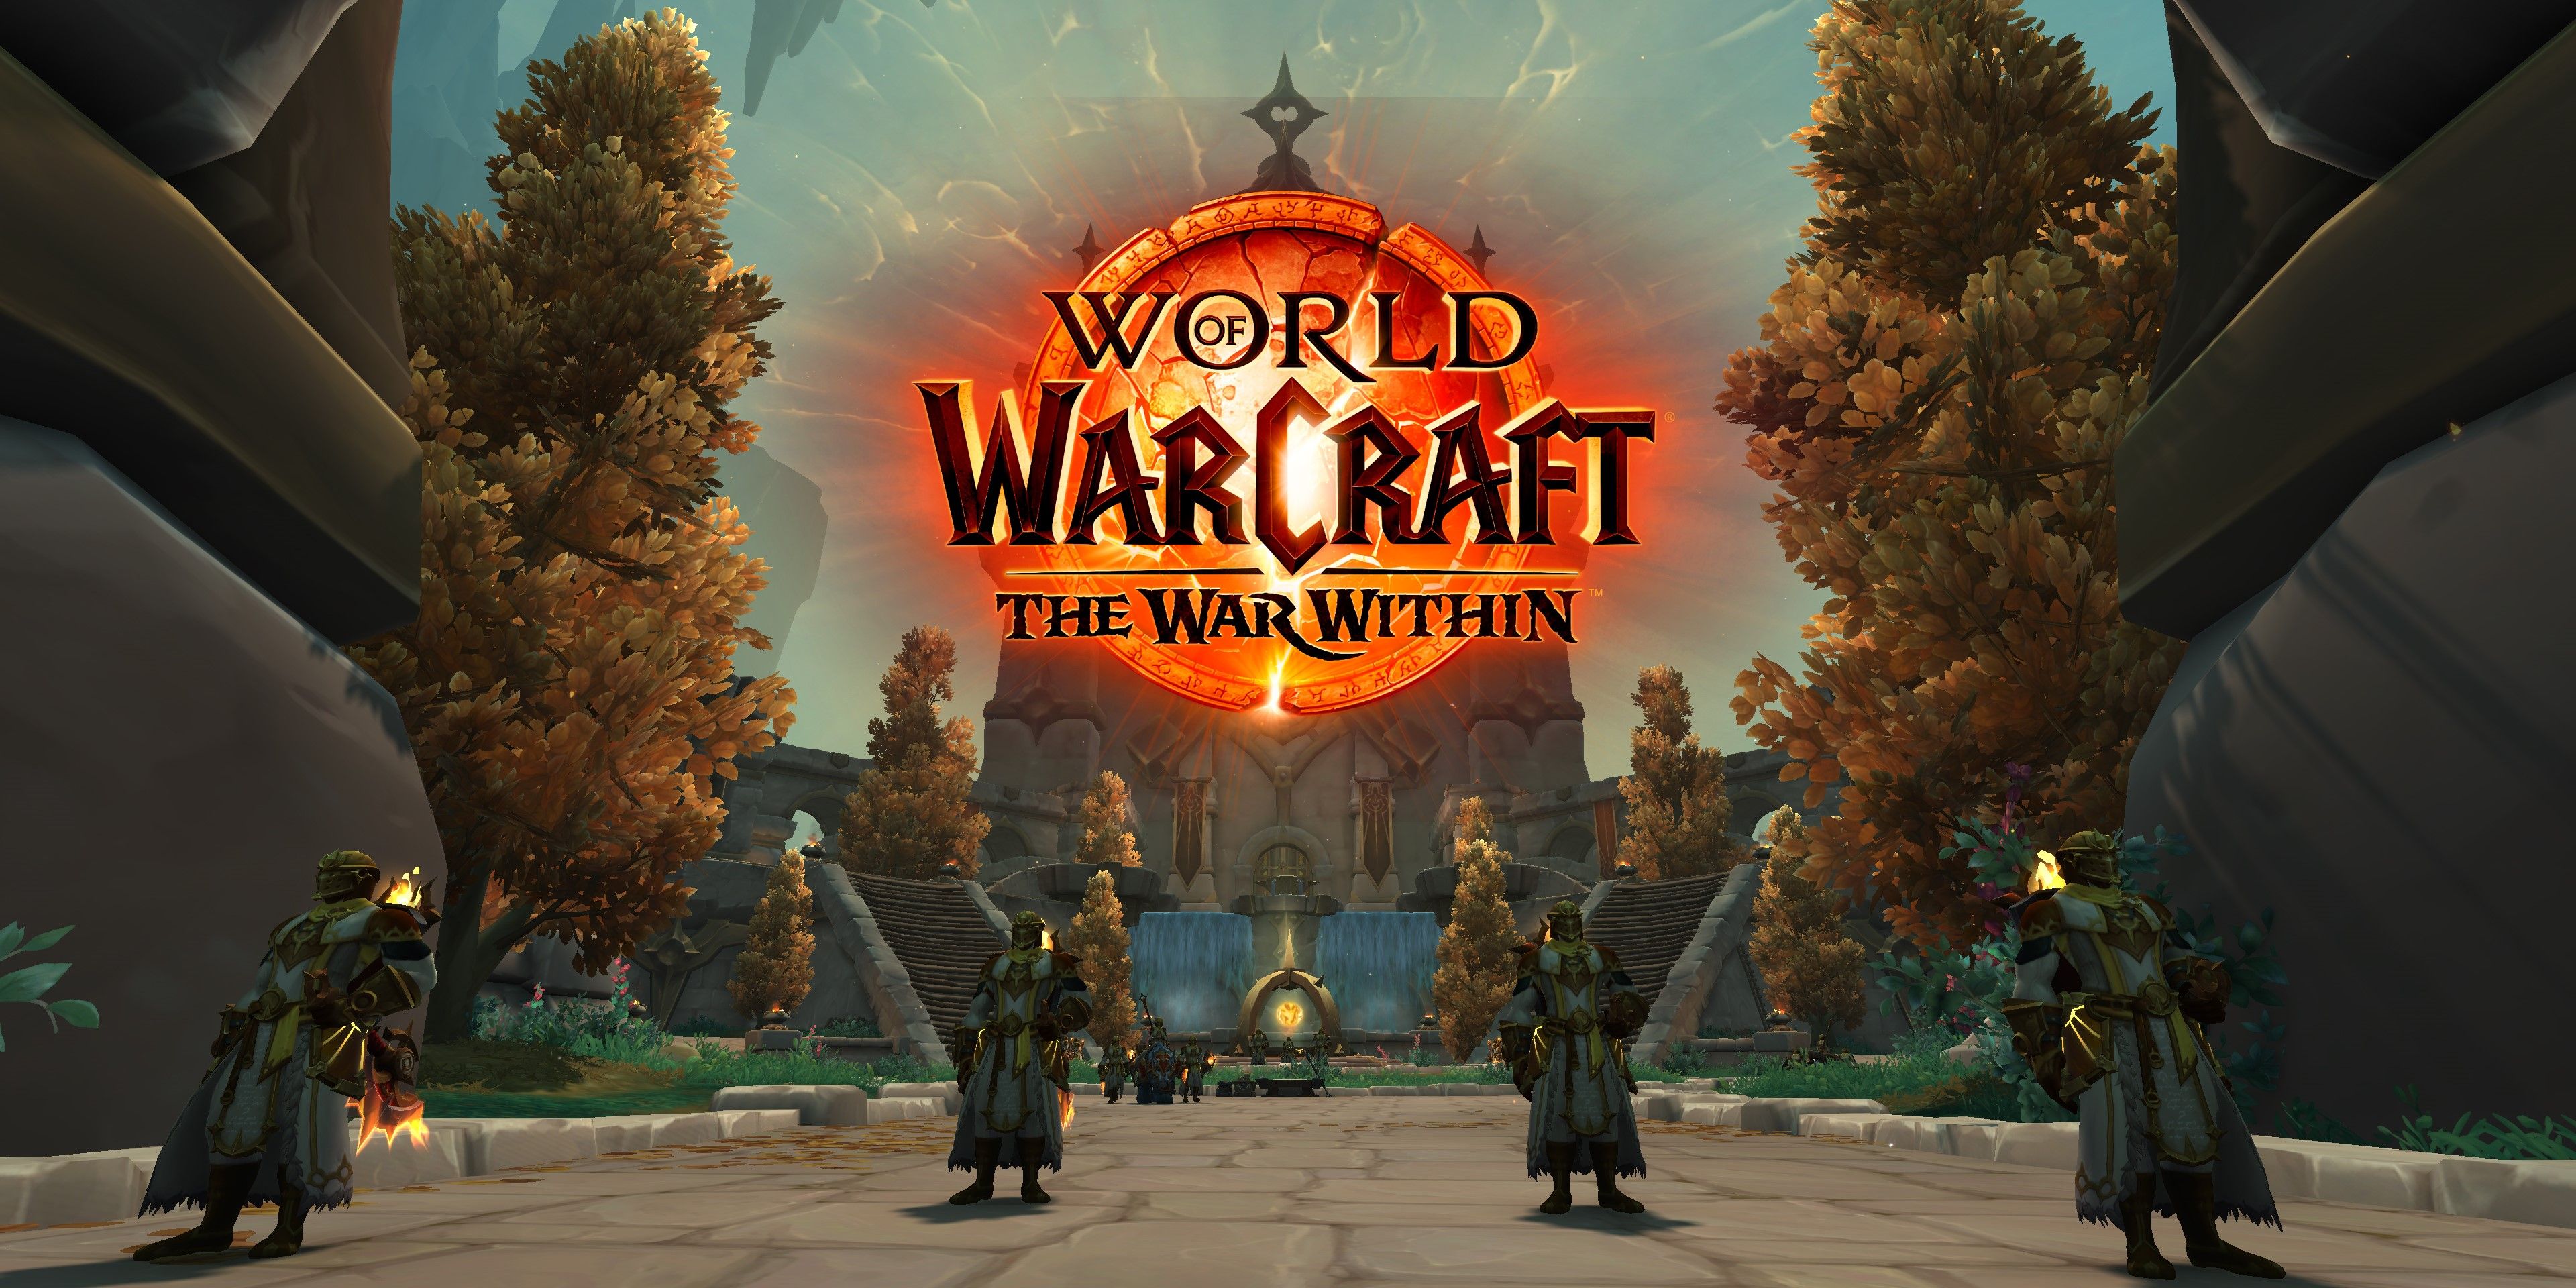 world of warcraft: the war within zone has dynamic environment effect